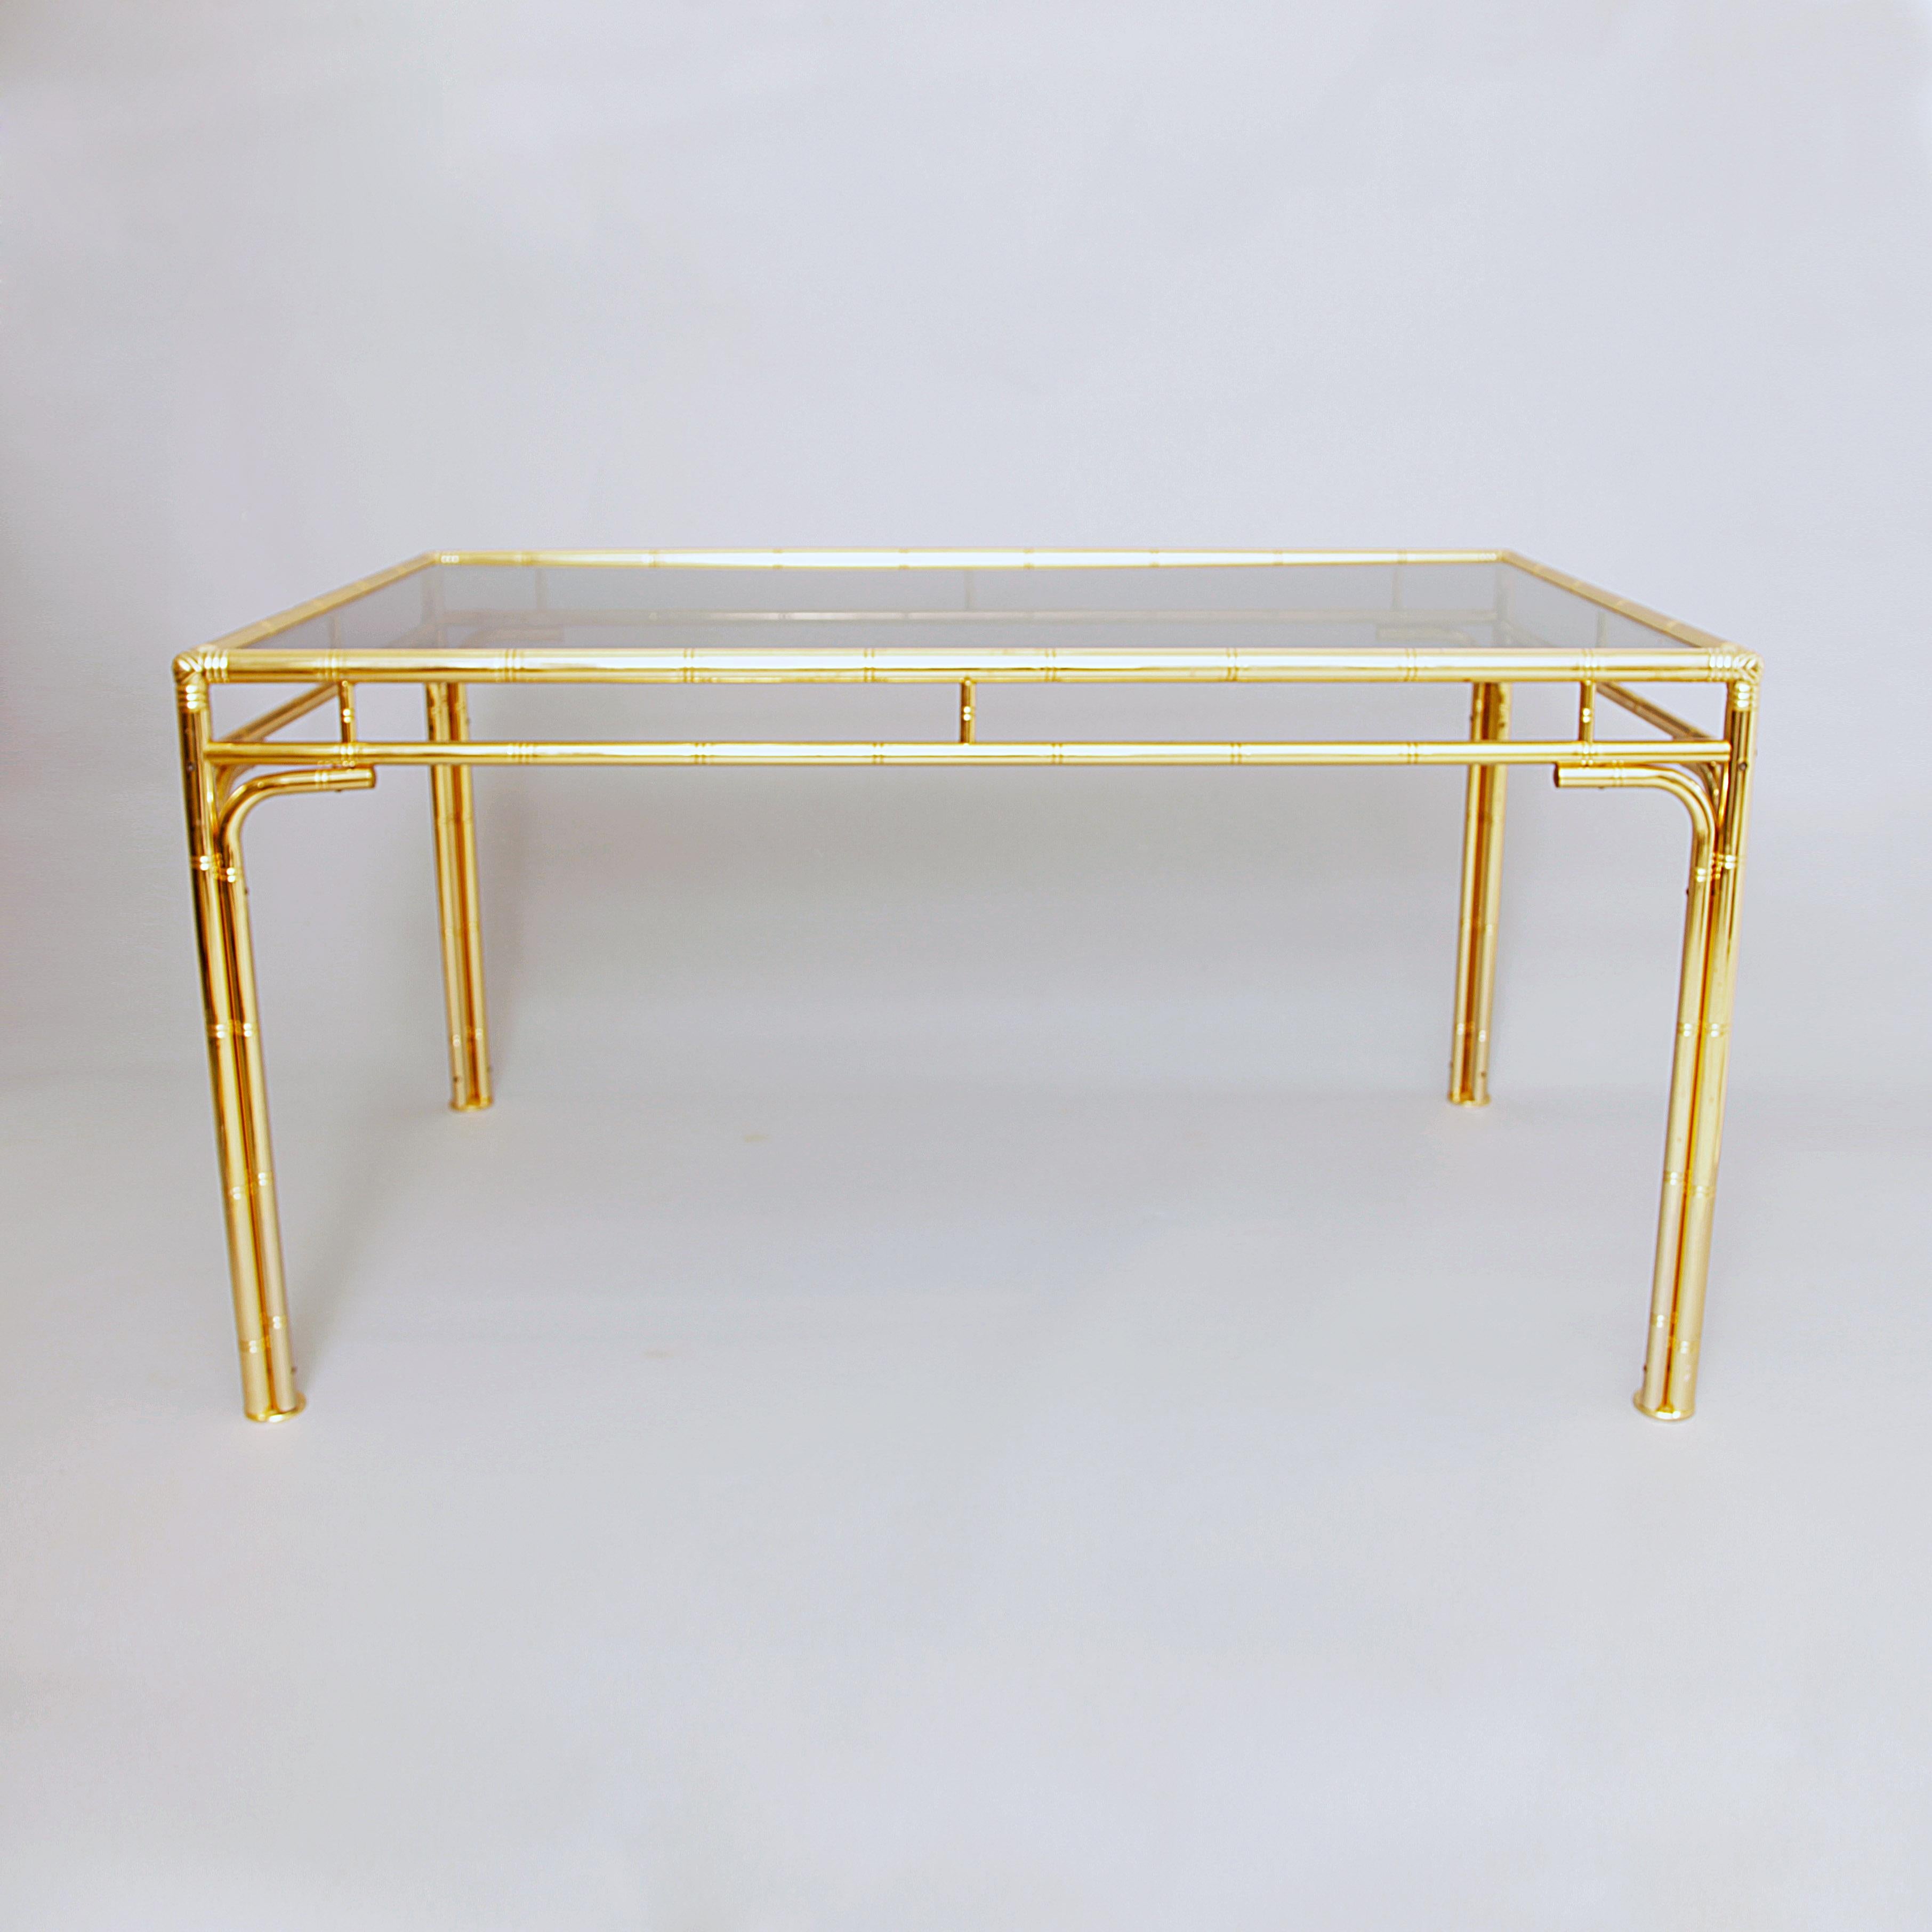 Italian Brass Faux Bamboo Dining Table Glass Hollywood Regency Vintage 1970s Midcentury For Sale